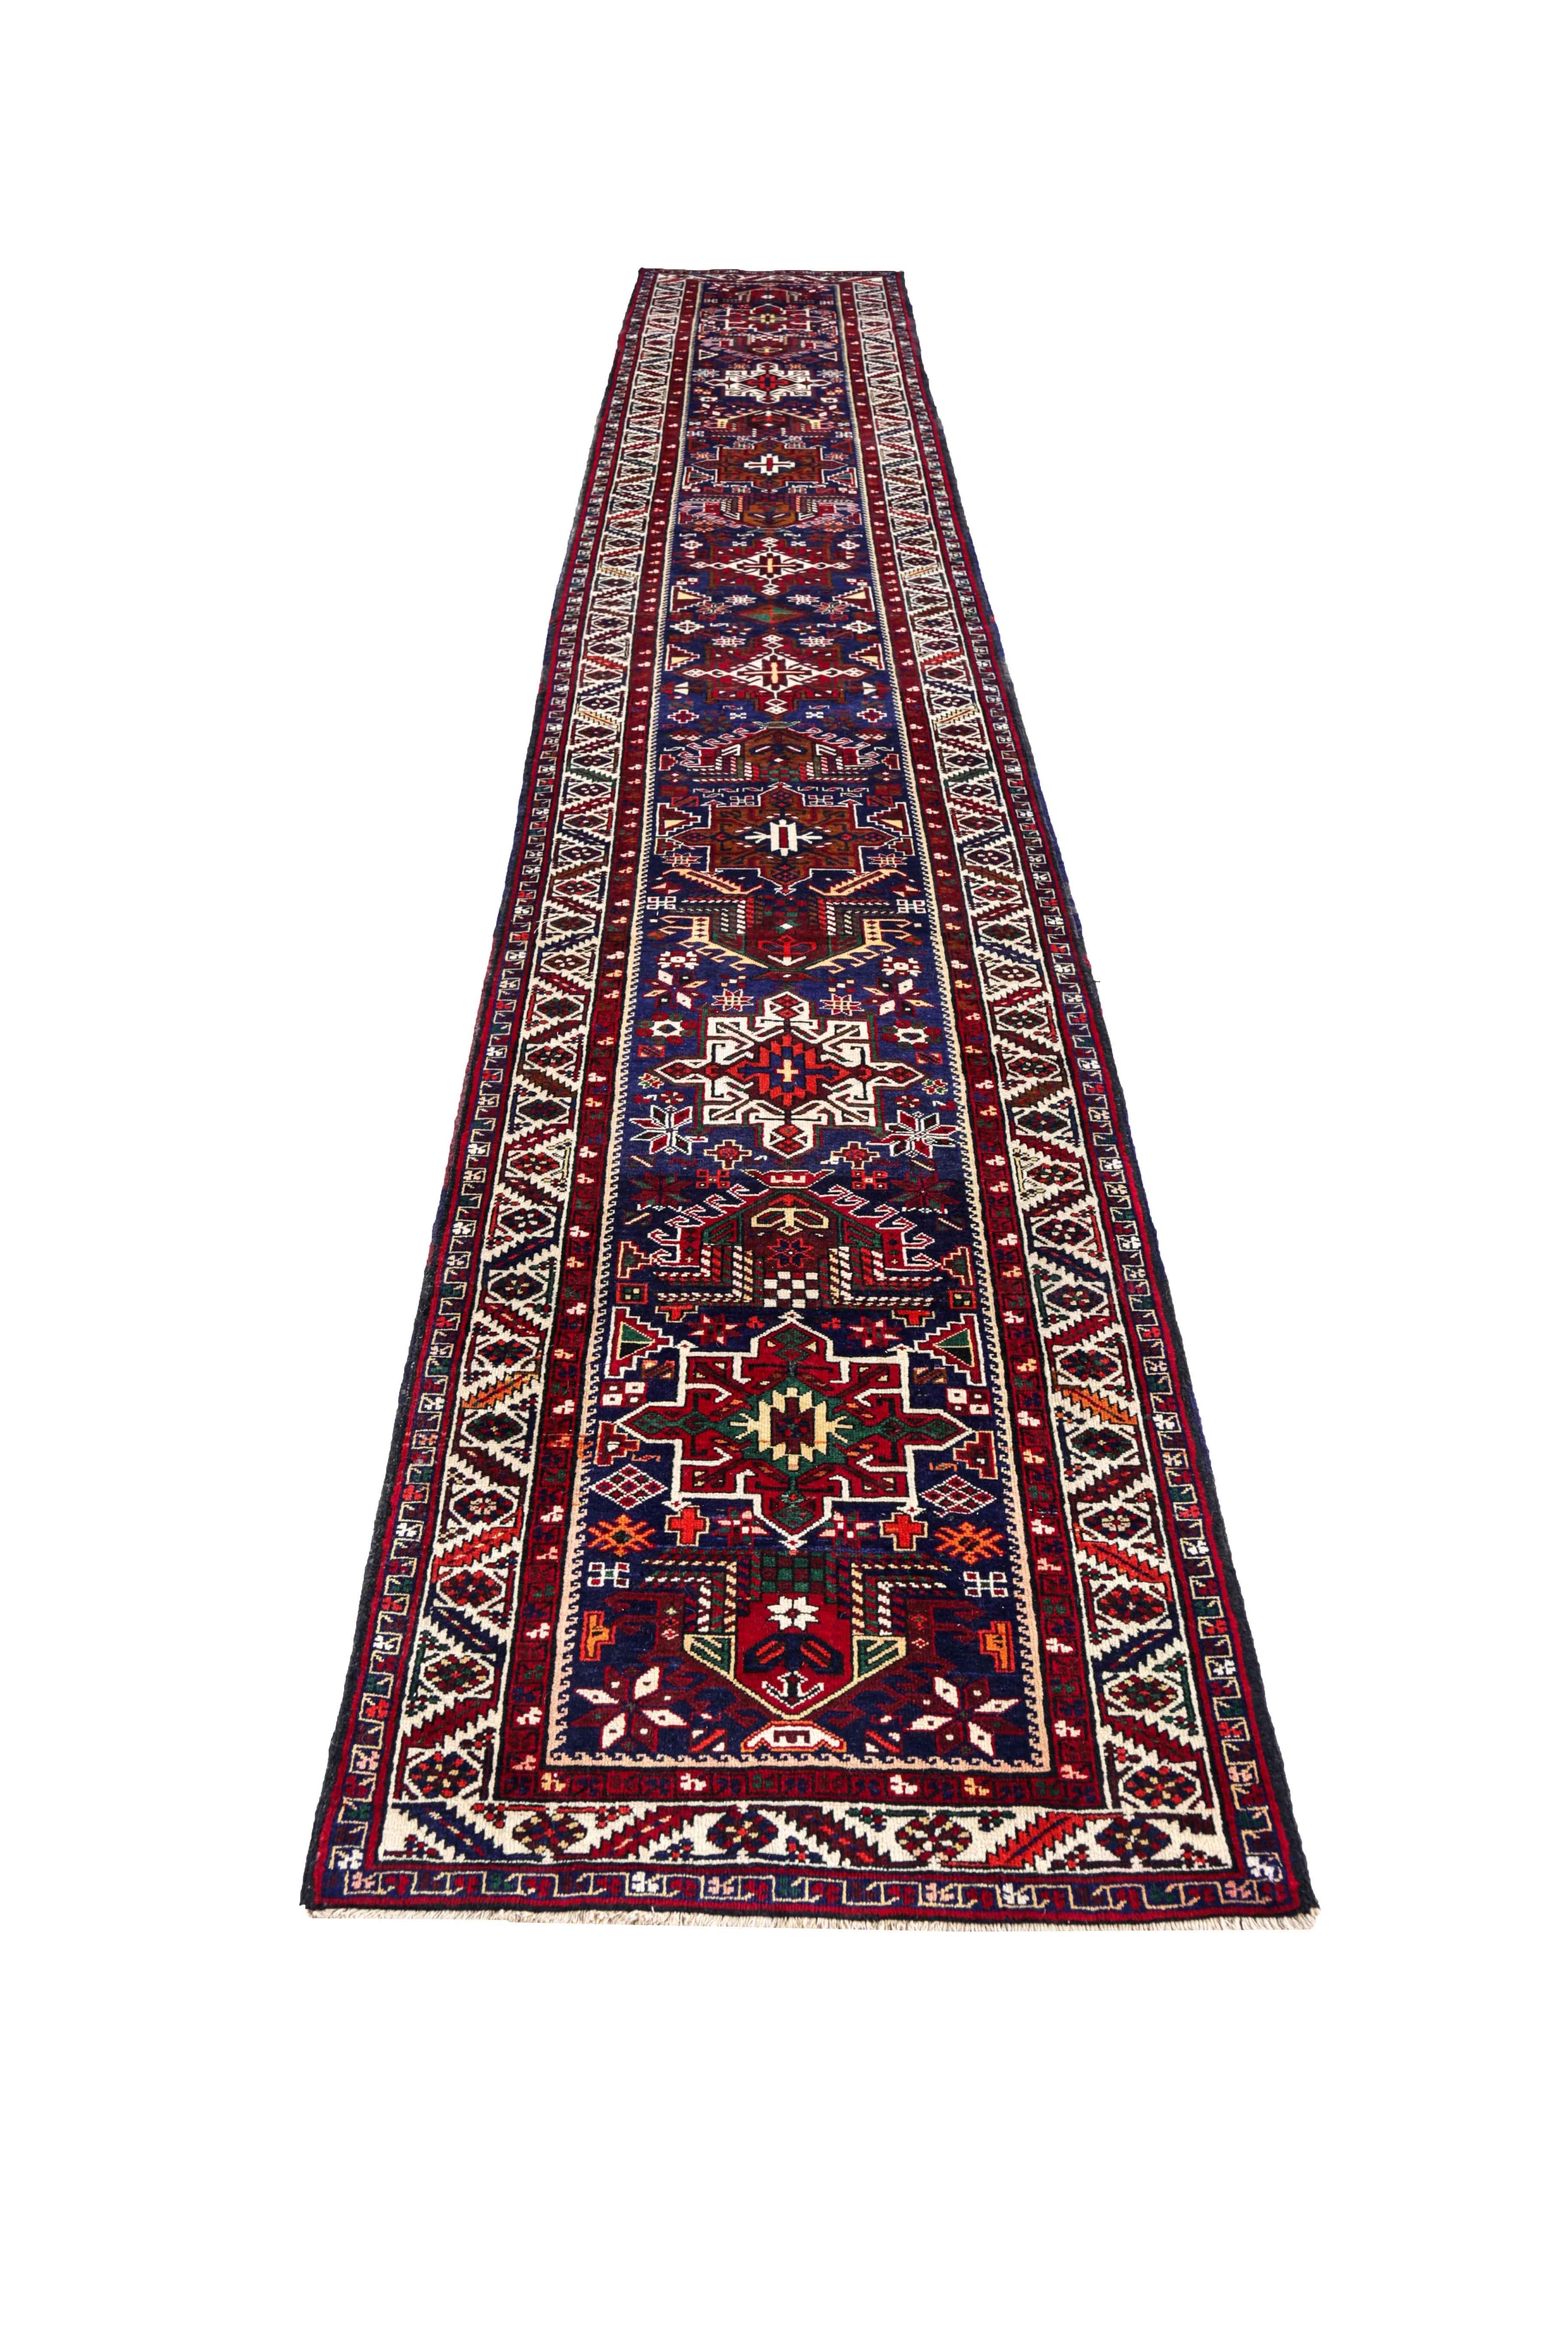 Antique Persian runner rug handwoven from the finest sheep’s wool. It’s colored with all-natural vegetable dyes that are safe for humans and pets. It’s a traditional Sarab design handwoven by expert artisans. It’s a lovely runner rug that can be